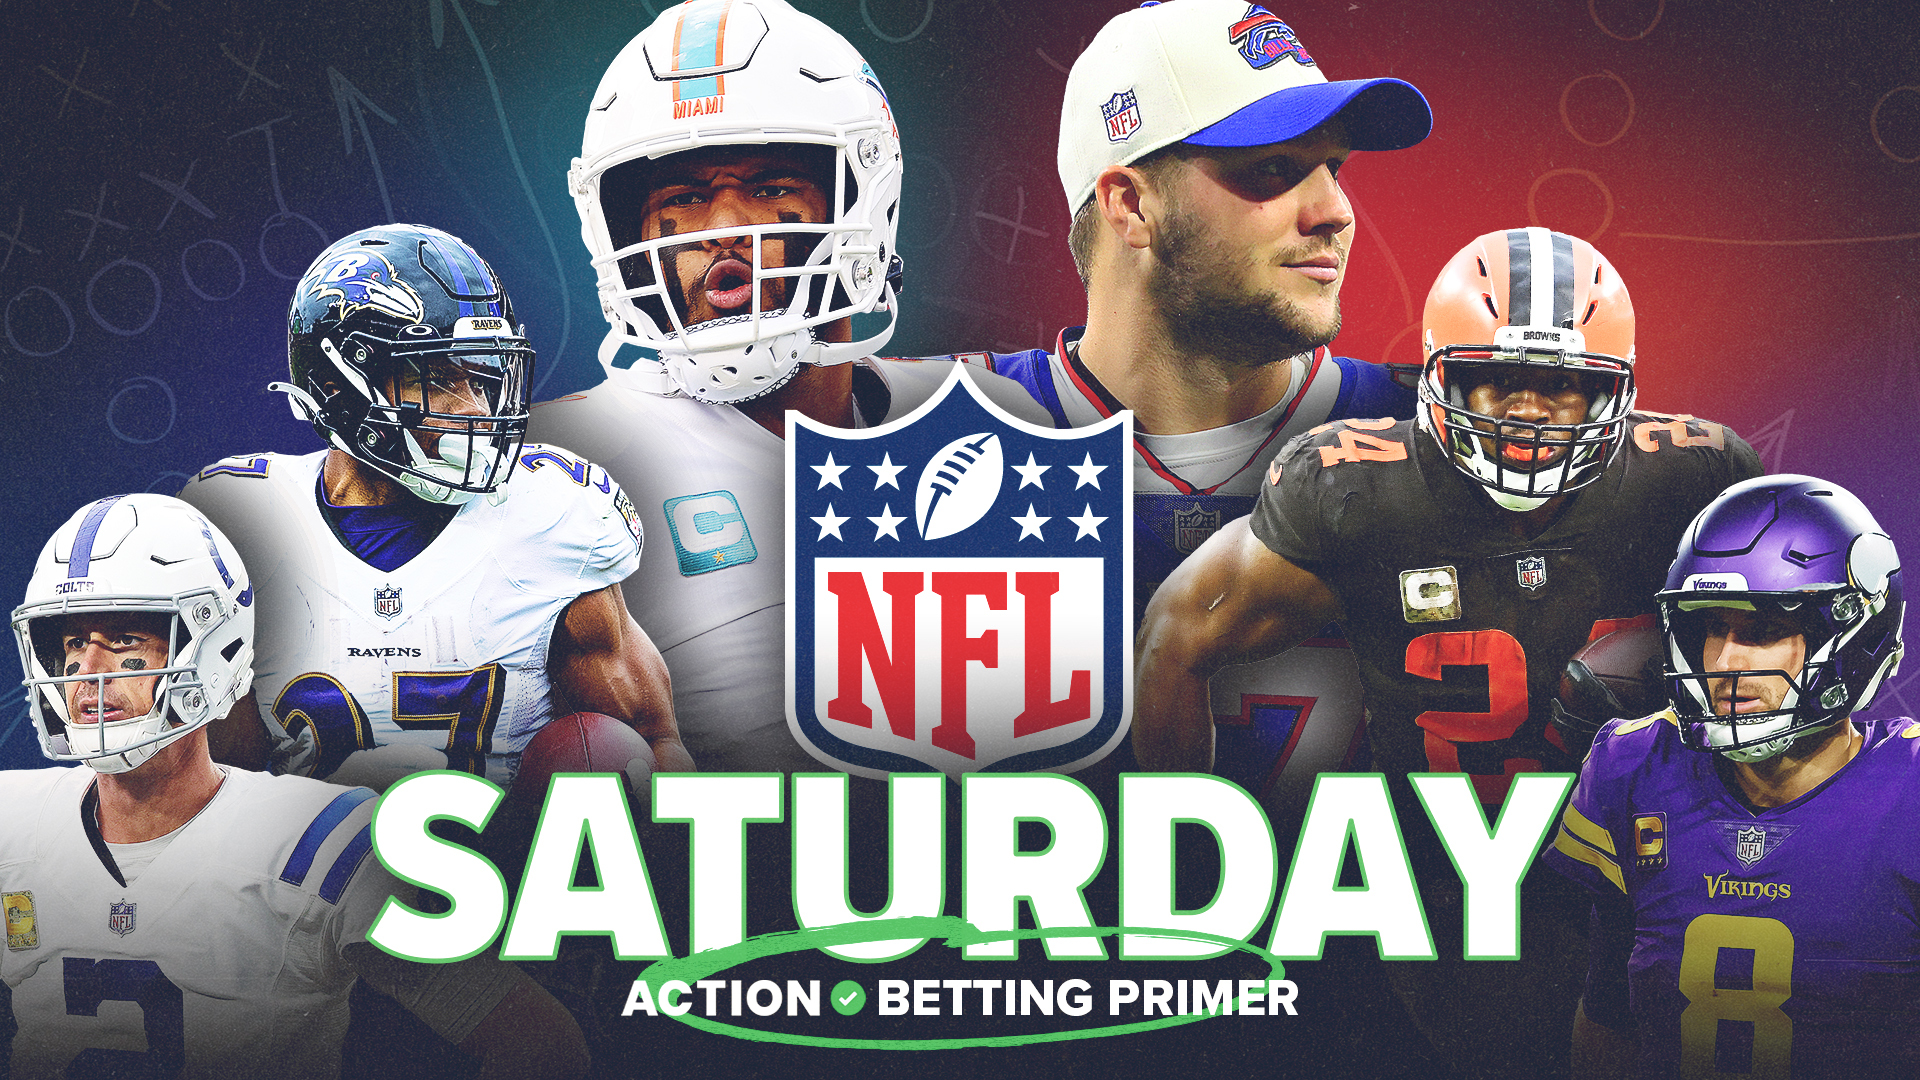 nfl best bets action network